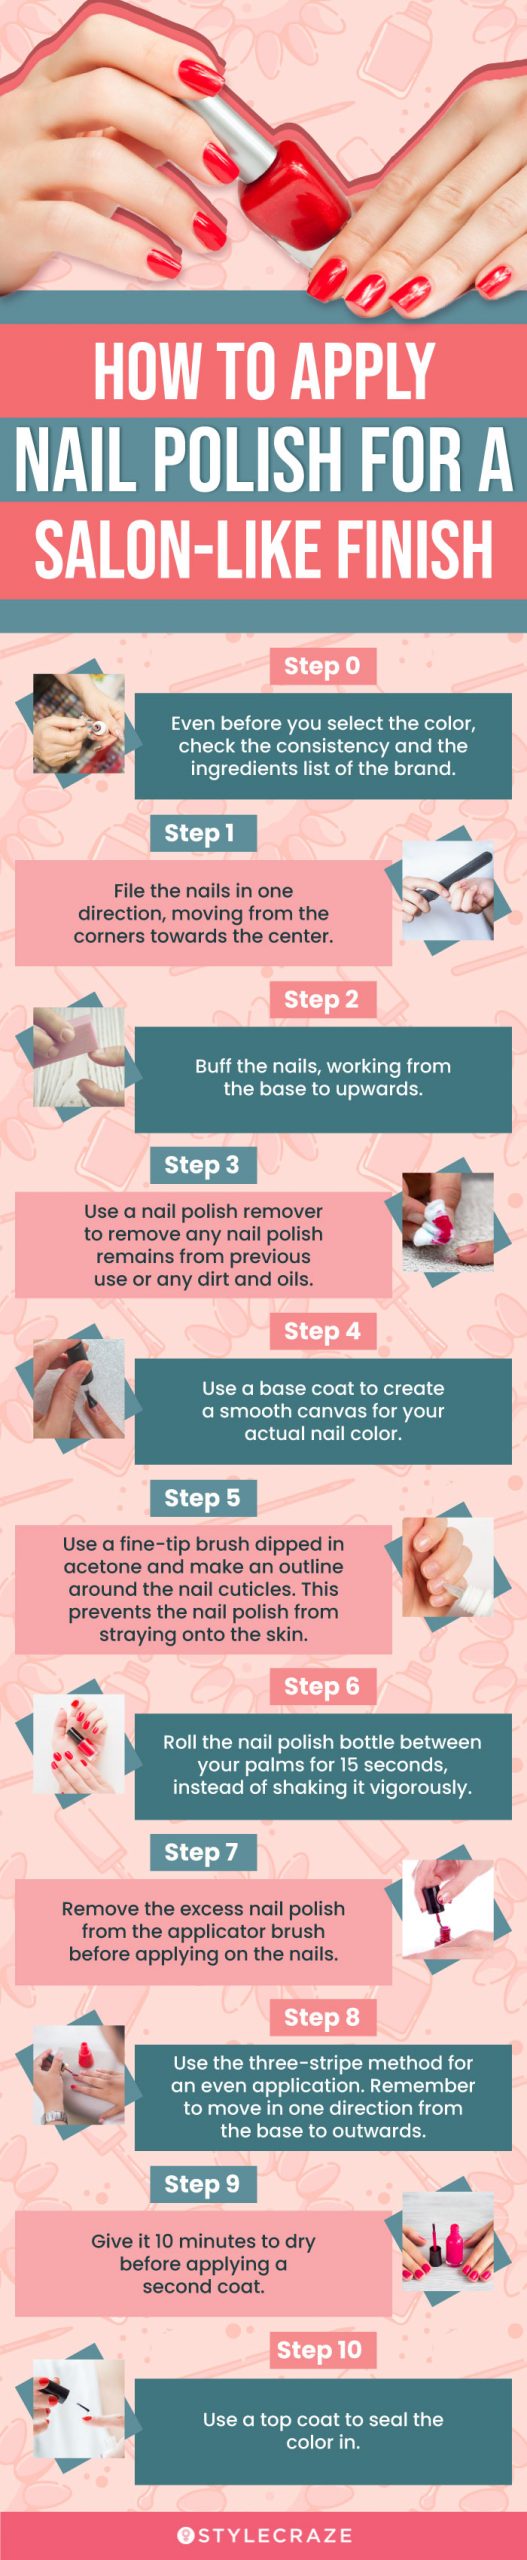 How To Apply Nail Polish For A Salon-Like Finish (infographic)